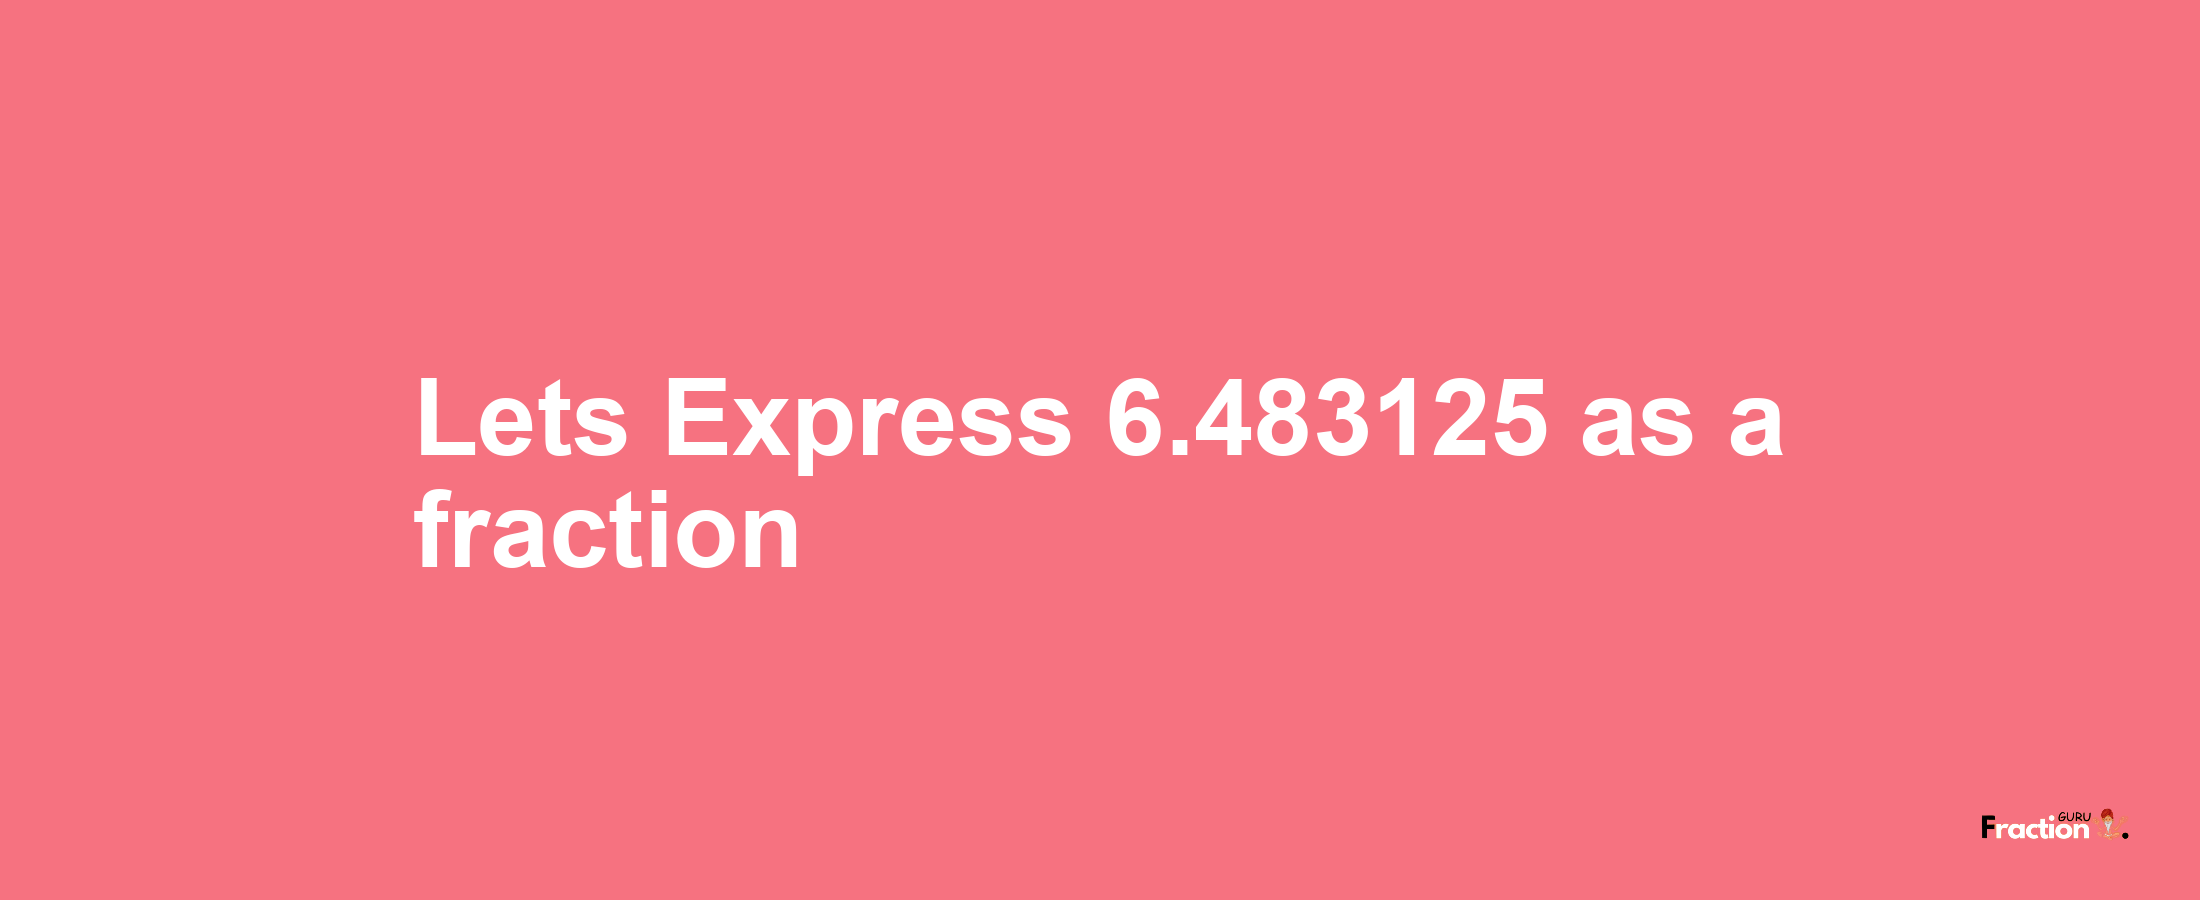 Lets Express 6.483125 as afraction